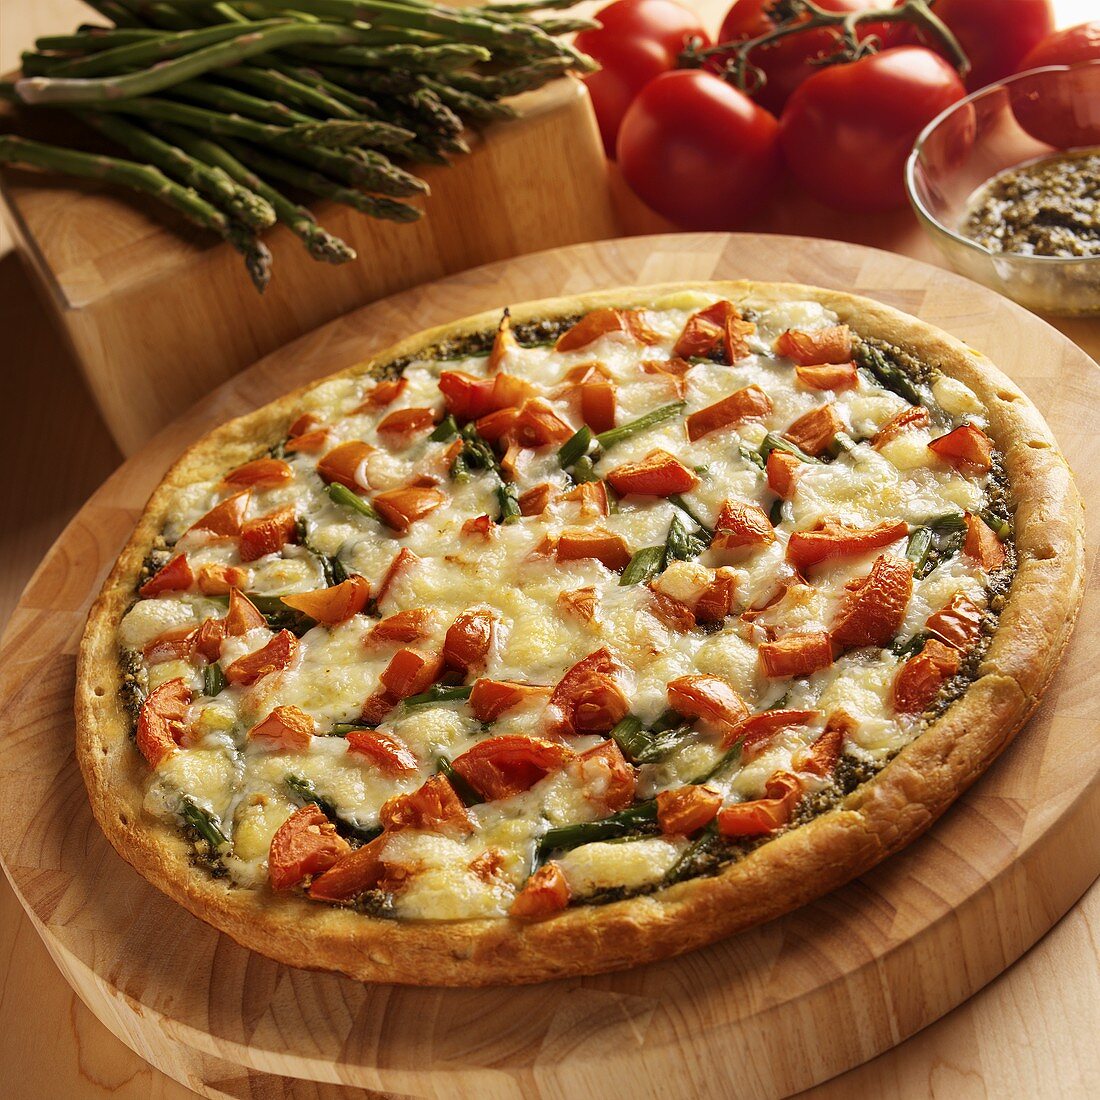 Asparagus, Tomato and Pesto Pizza on Wooden Cutting Board